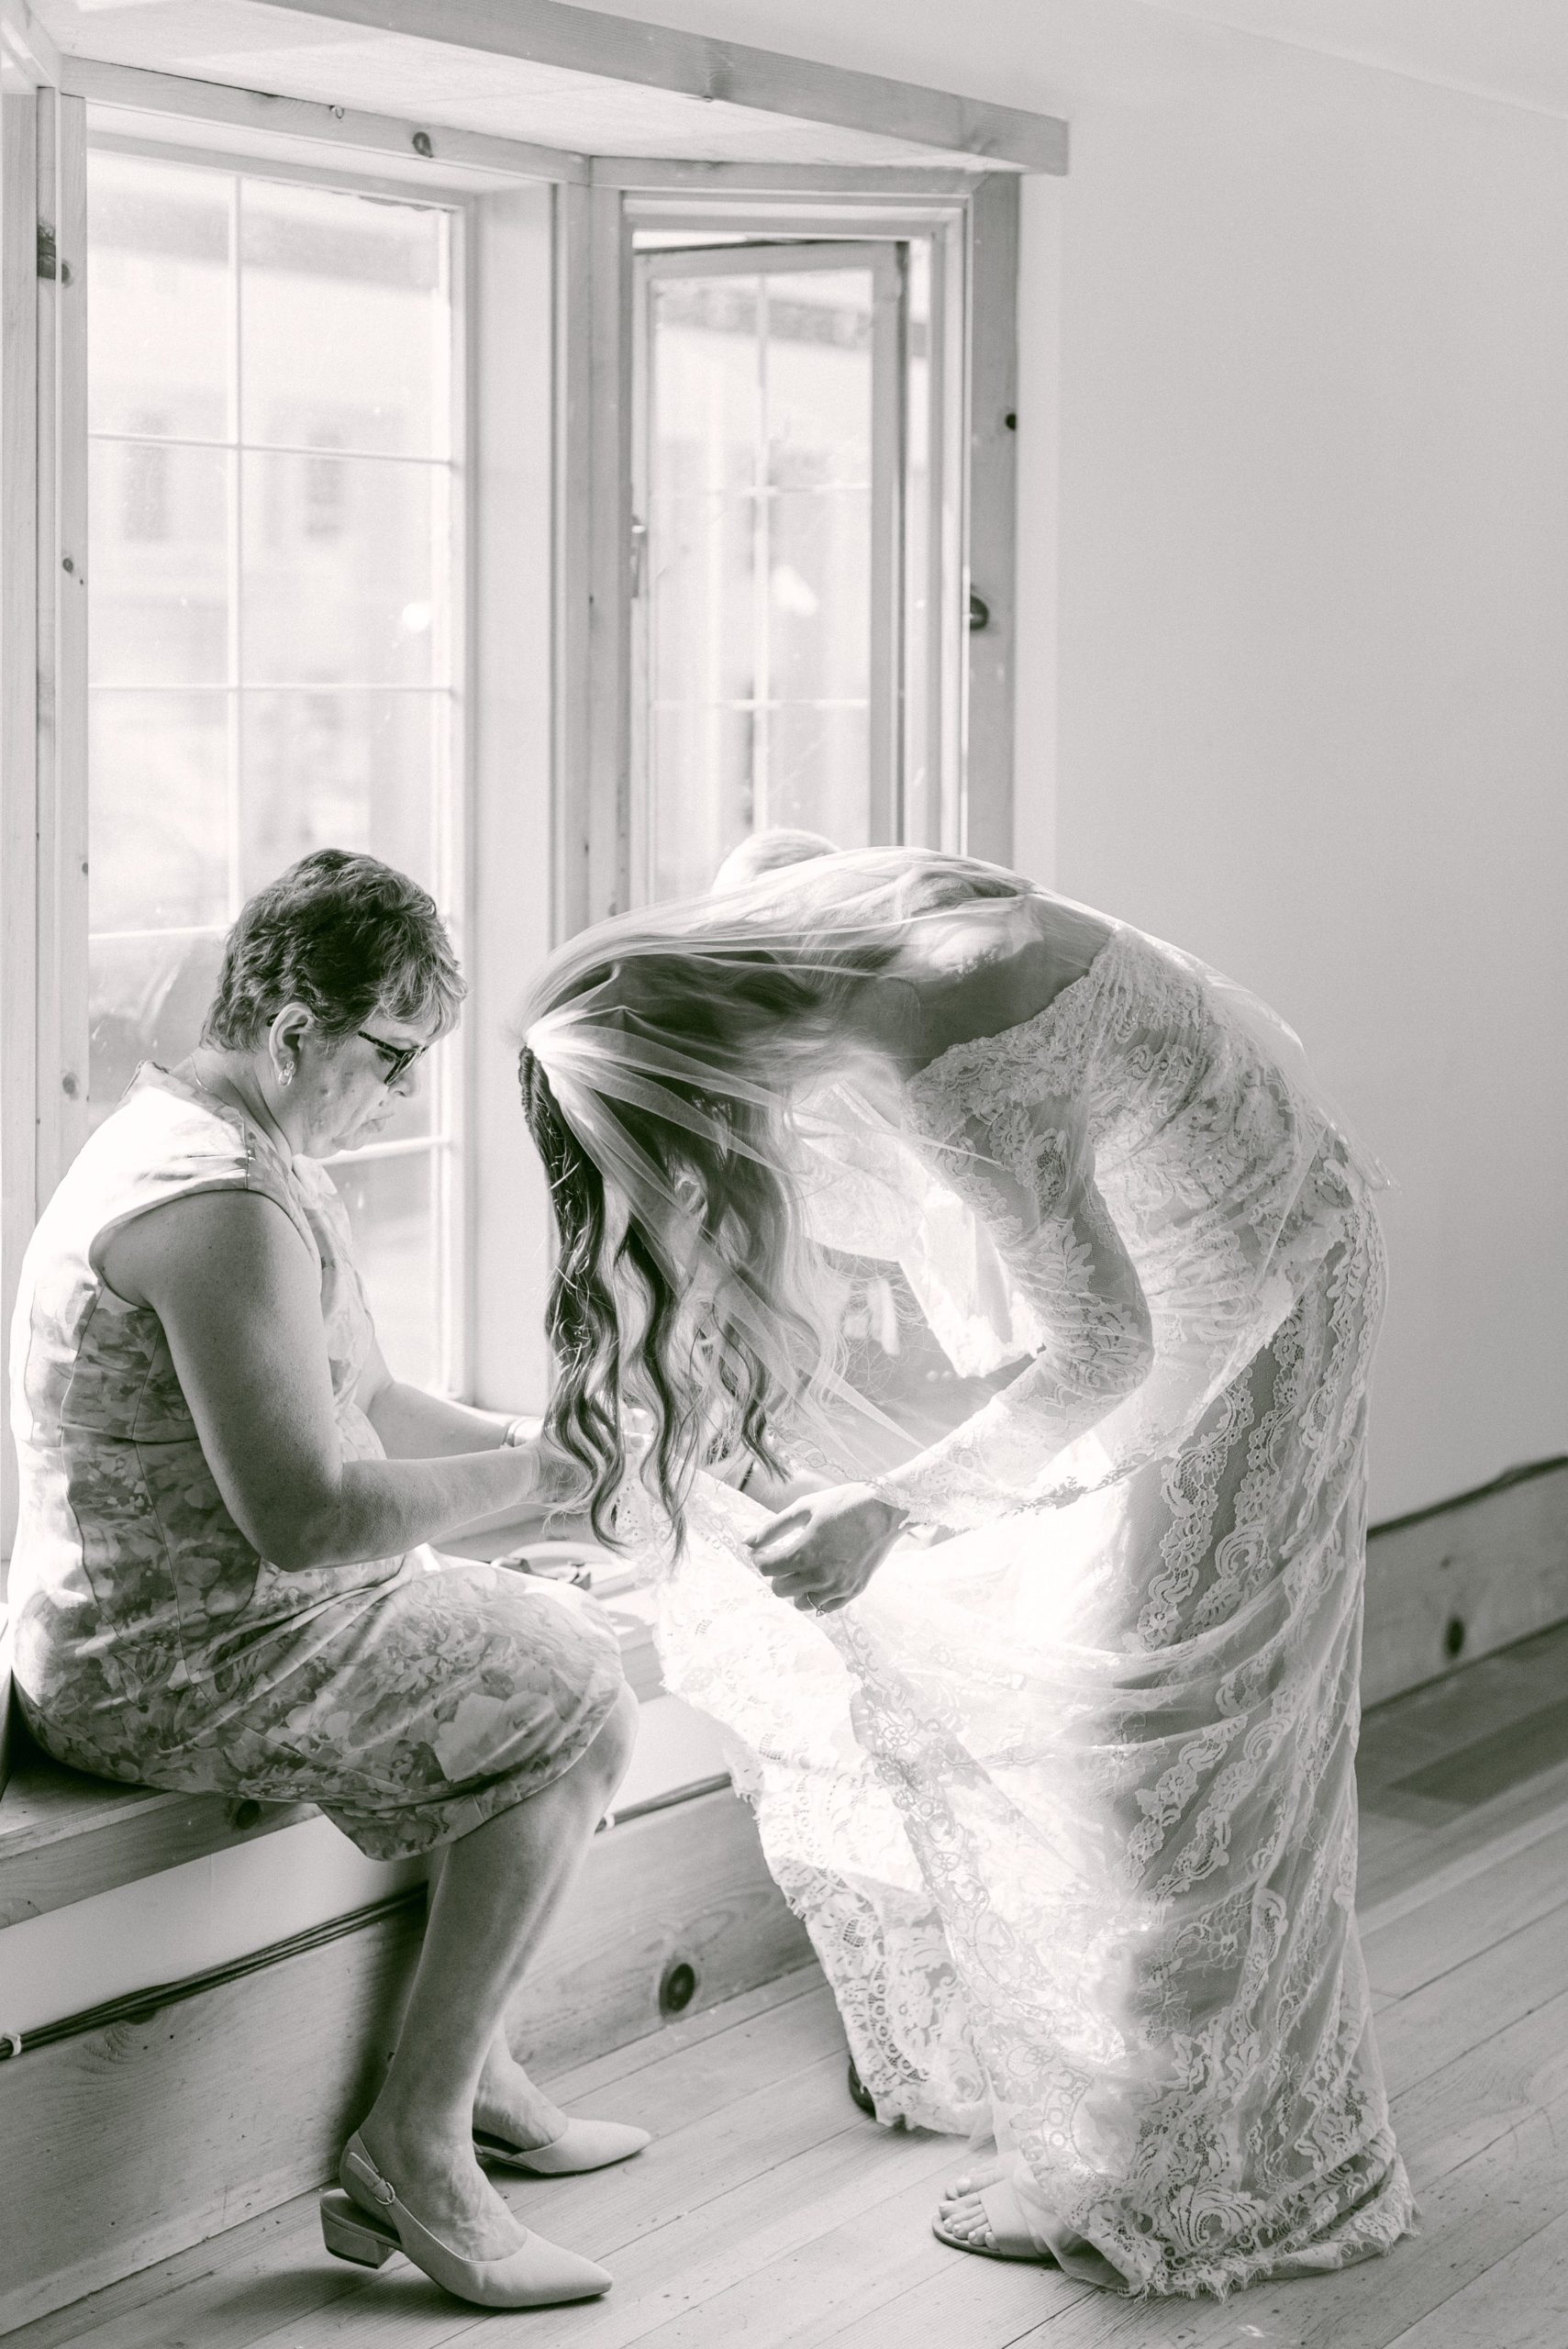 Fine Art Weddings in Seattle, Washington. The Sound Hotel, and The Center for Wooden Boats. Mother of the bride fixing bride's dress snag in the sunny window seat before the wedding ceremony.